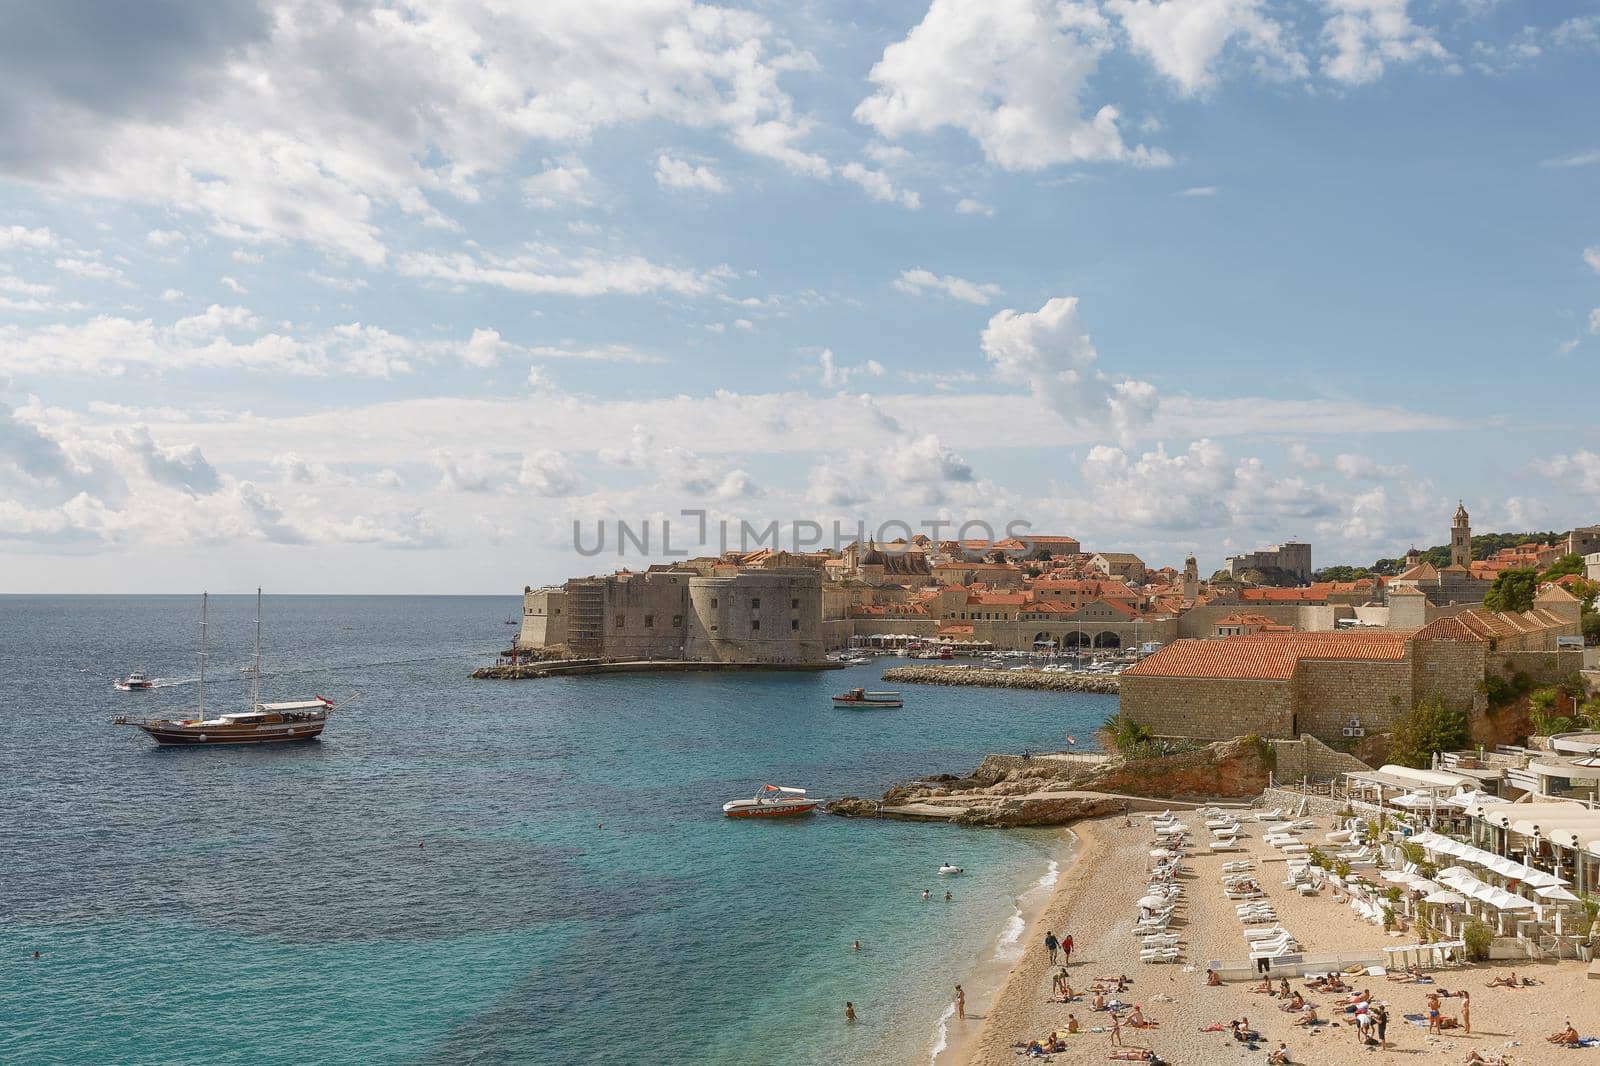 Panoramic view of the bay and Old Town of Dubrovnik, Croatia.